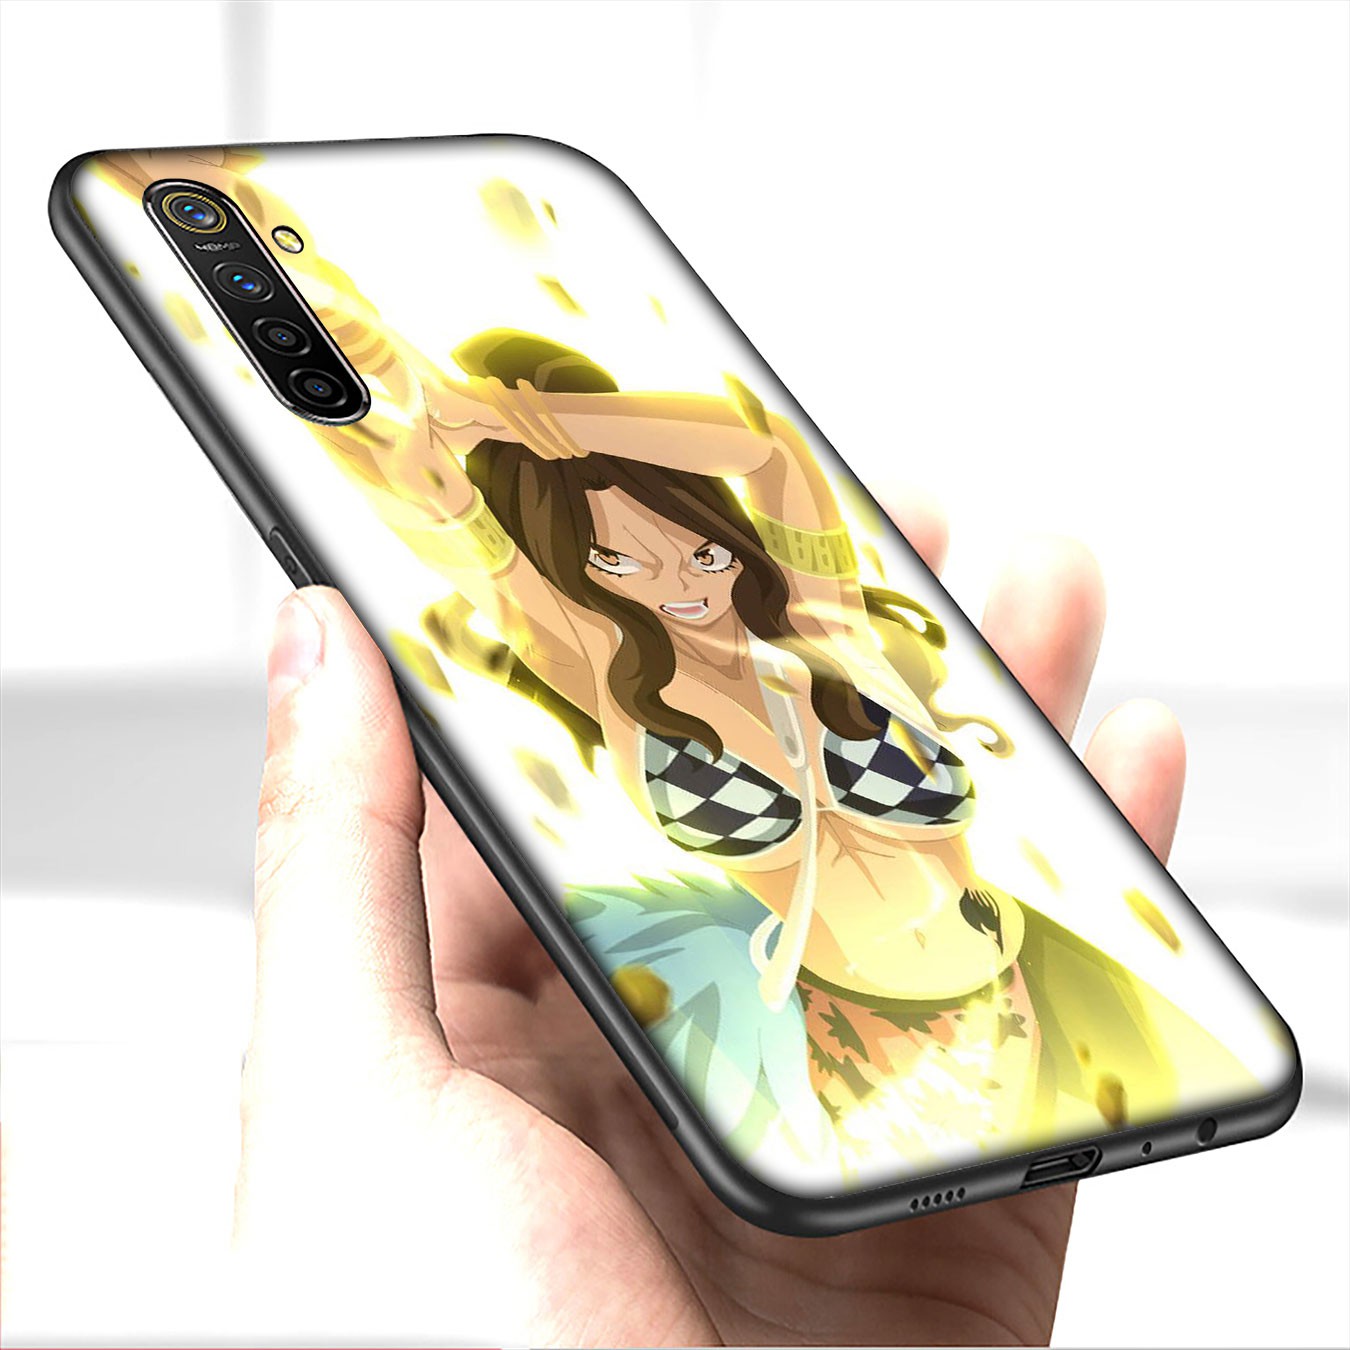 Ốp Lưng Silicone Mềm In Hình Fairy Tail Cho Oppo A12 A92 A83 A77 A72 A52 A37 A39 A57 A59 Neo 9 A12E F3 F1S R9S A1K A1